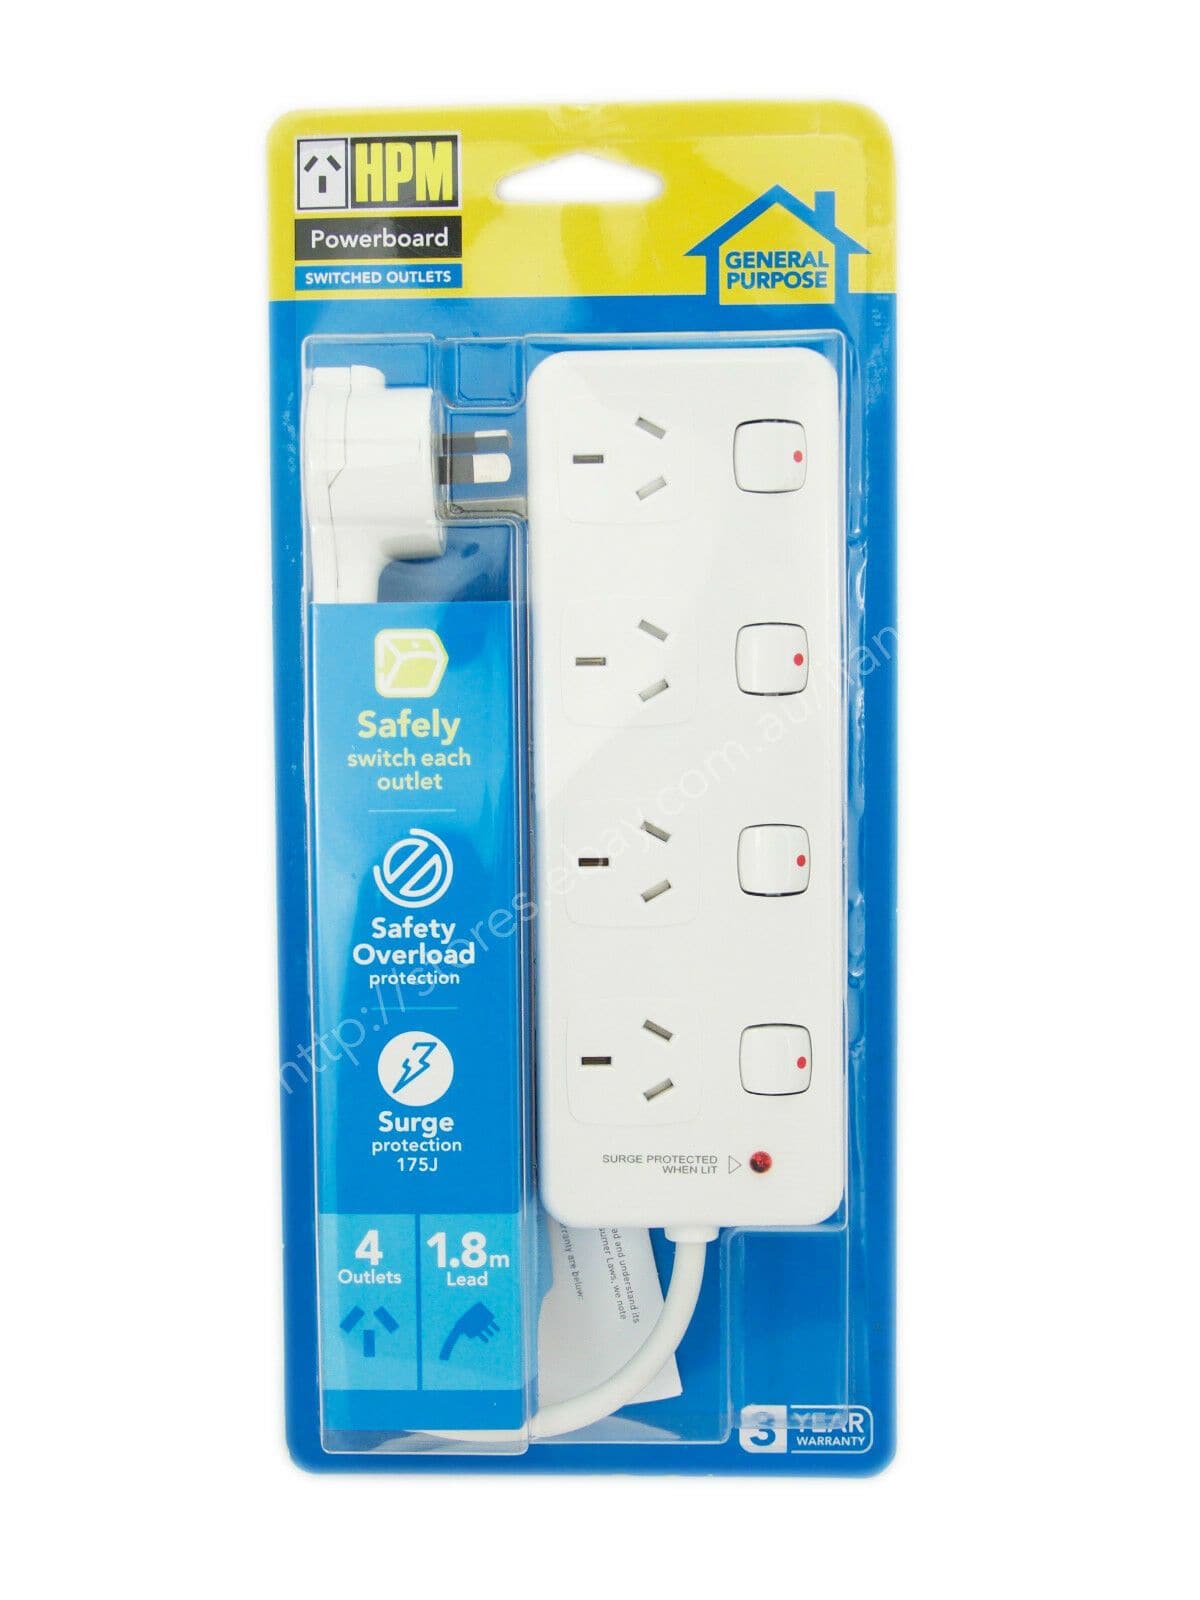 HPM 1.8m 4 Switched Outlets Powerboard With Safety Overload Protection D104PAWE - Double Bay Hardware